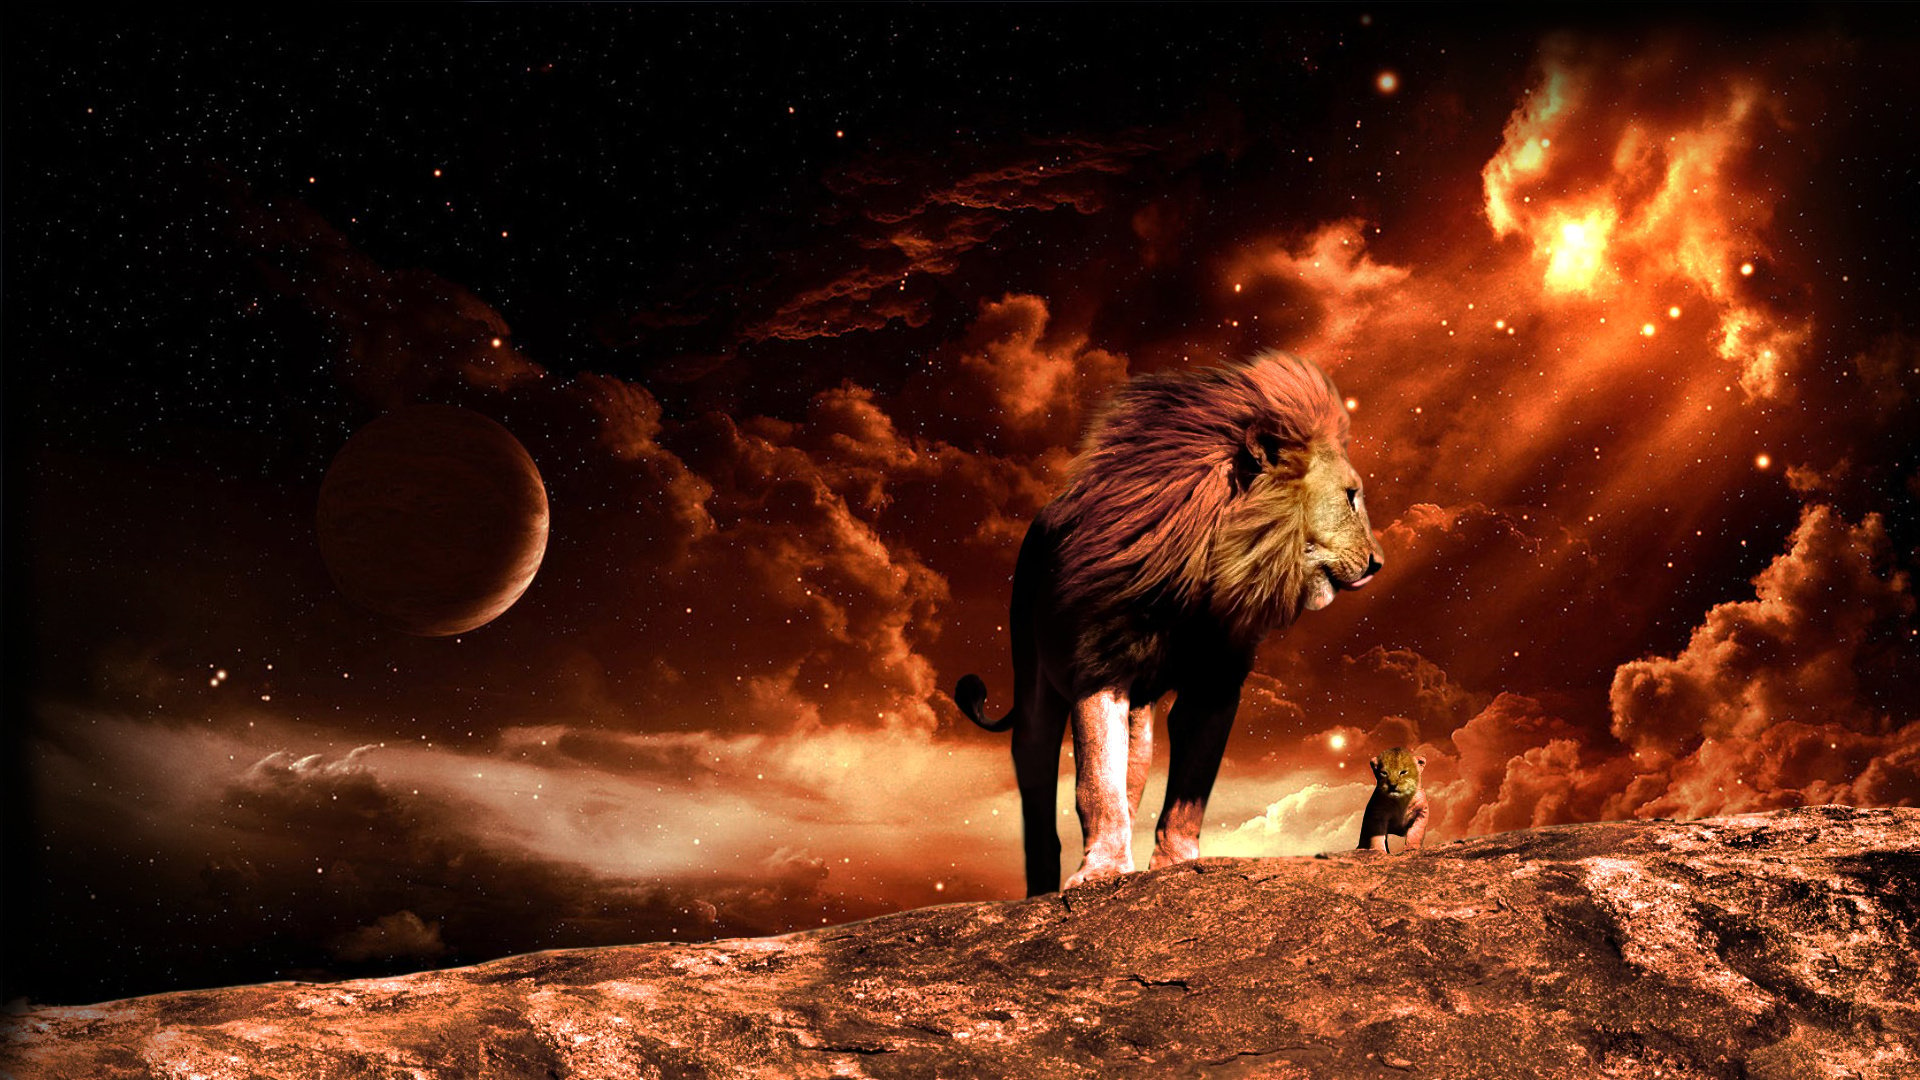 Wallpaper. Cosmos. photo. picture. lion, lion, space, fire